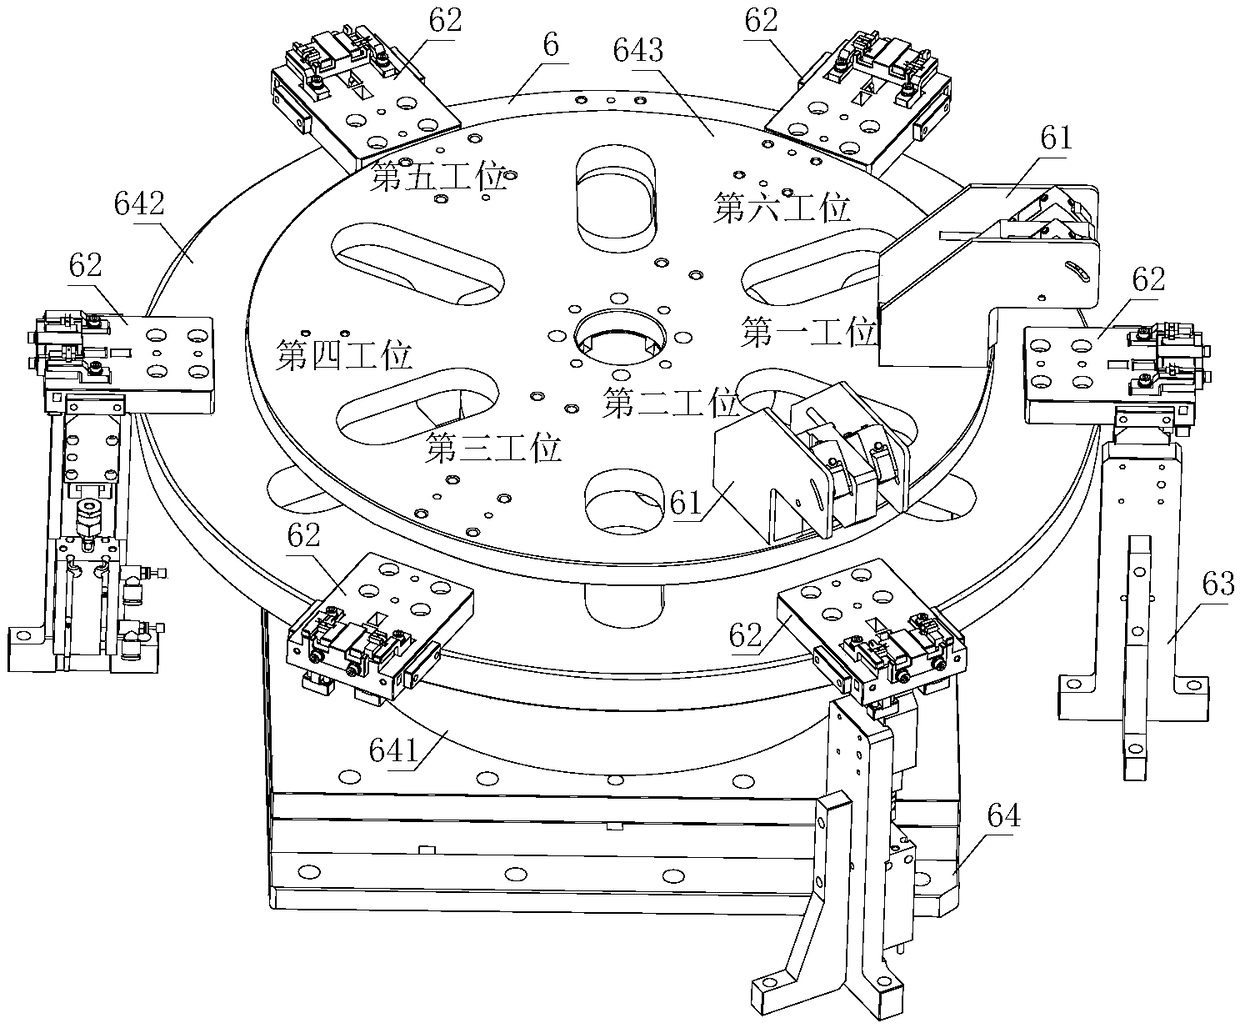 Automatic assembling machine based on mechanical hand and machine vision